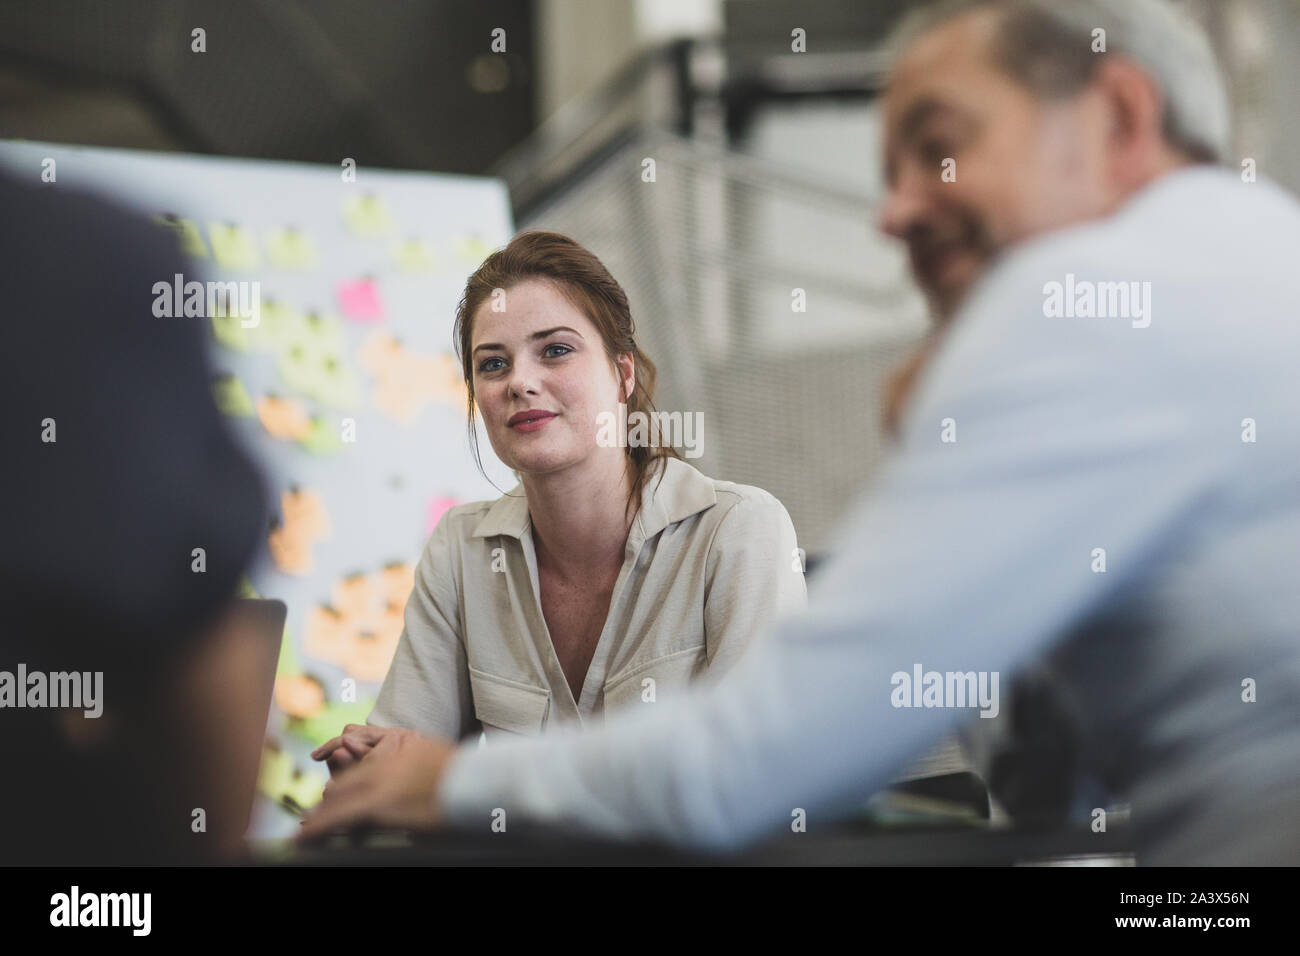 Female executive listening in a brainstorm meeting Stock Photo